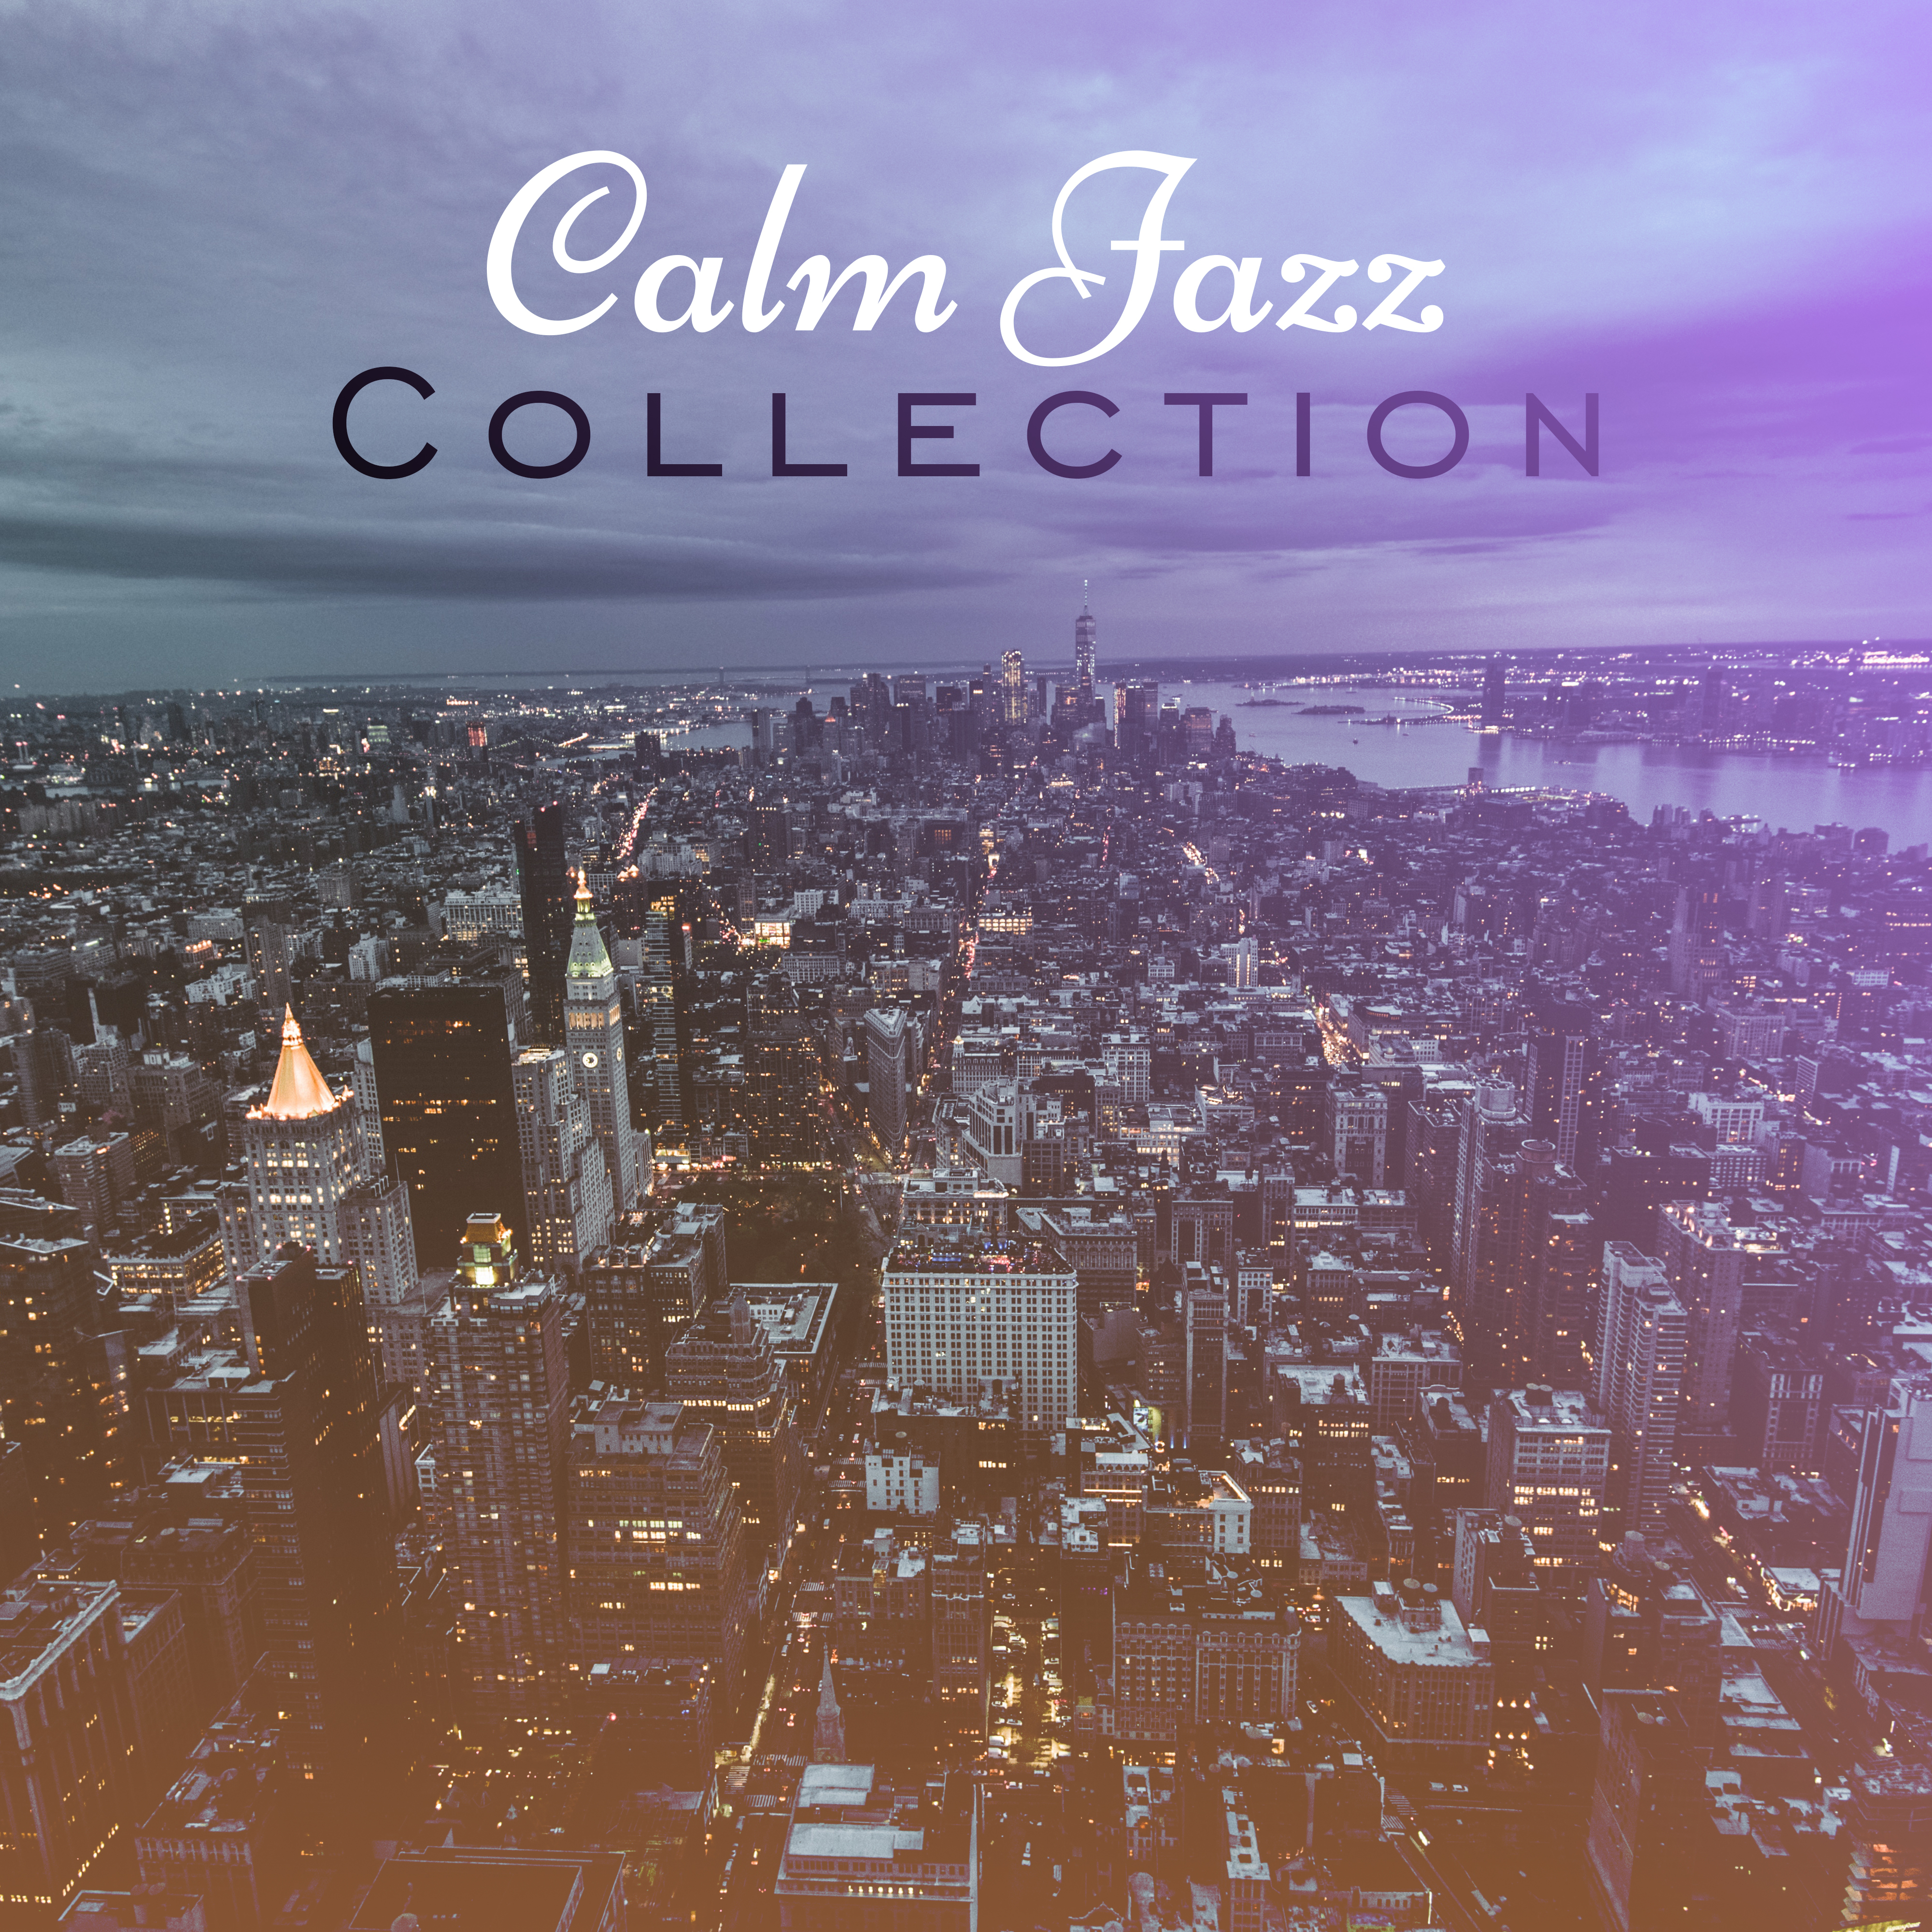 Calm Jazz Collection  Peaceful Jazz, Best Relaxing Songs to Rest, Soothing Sounds, Mellow Jazz